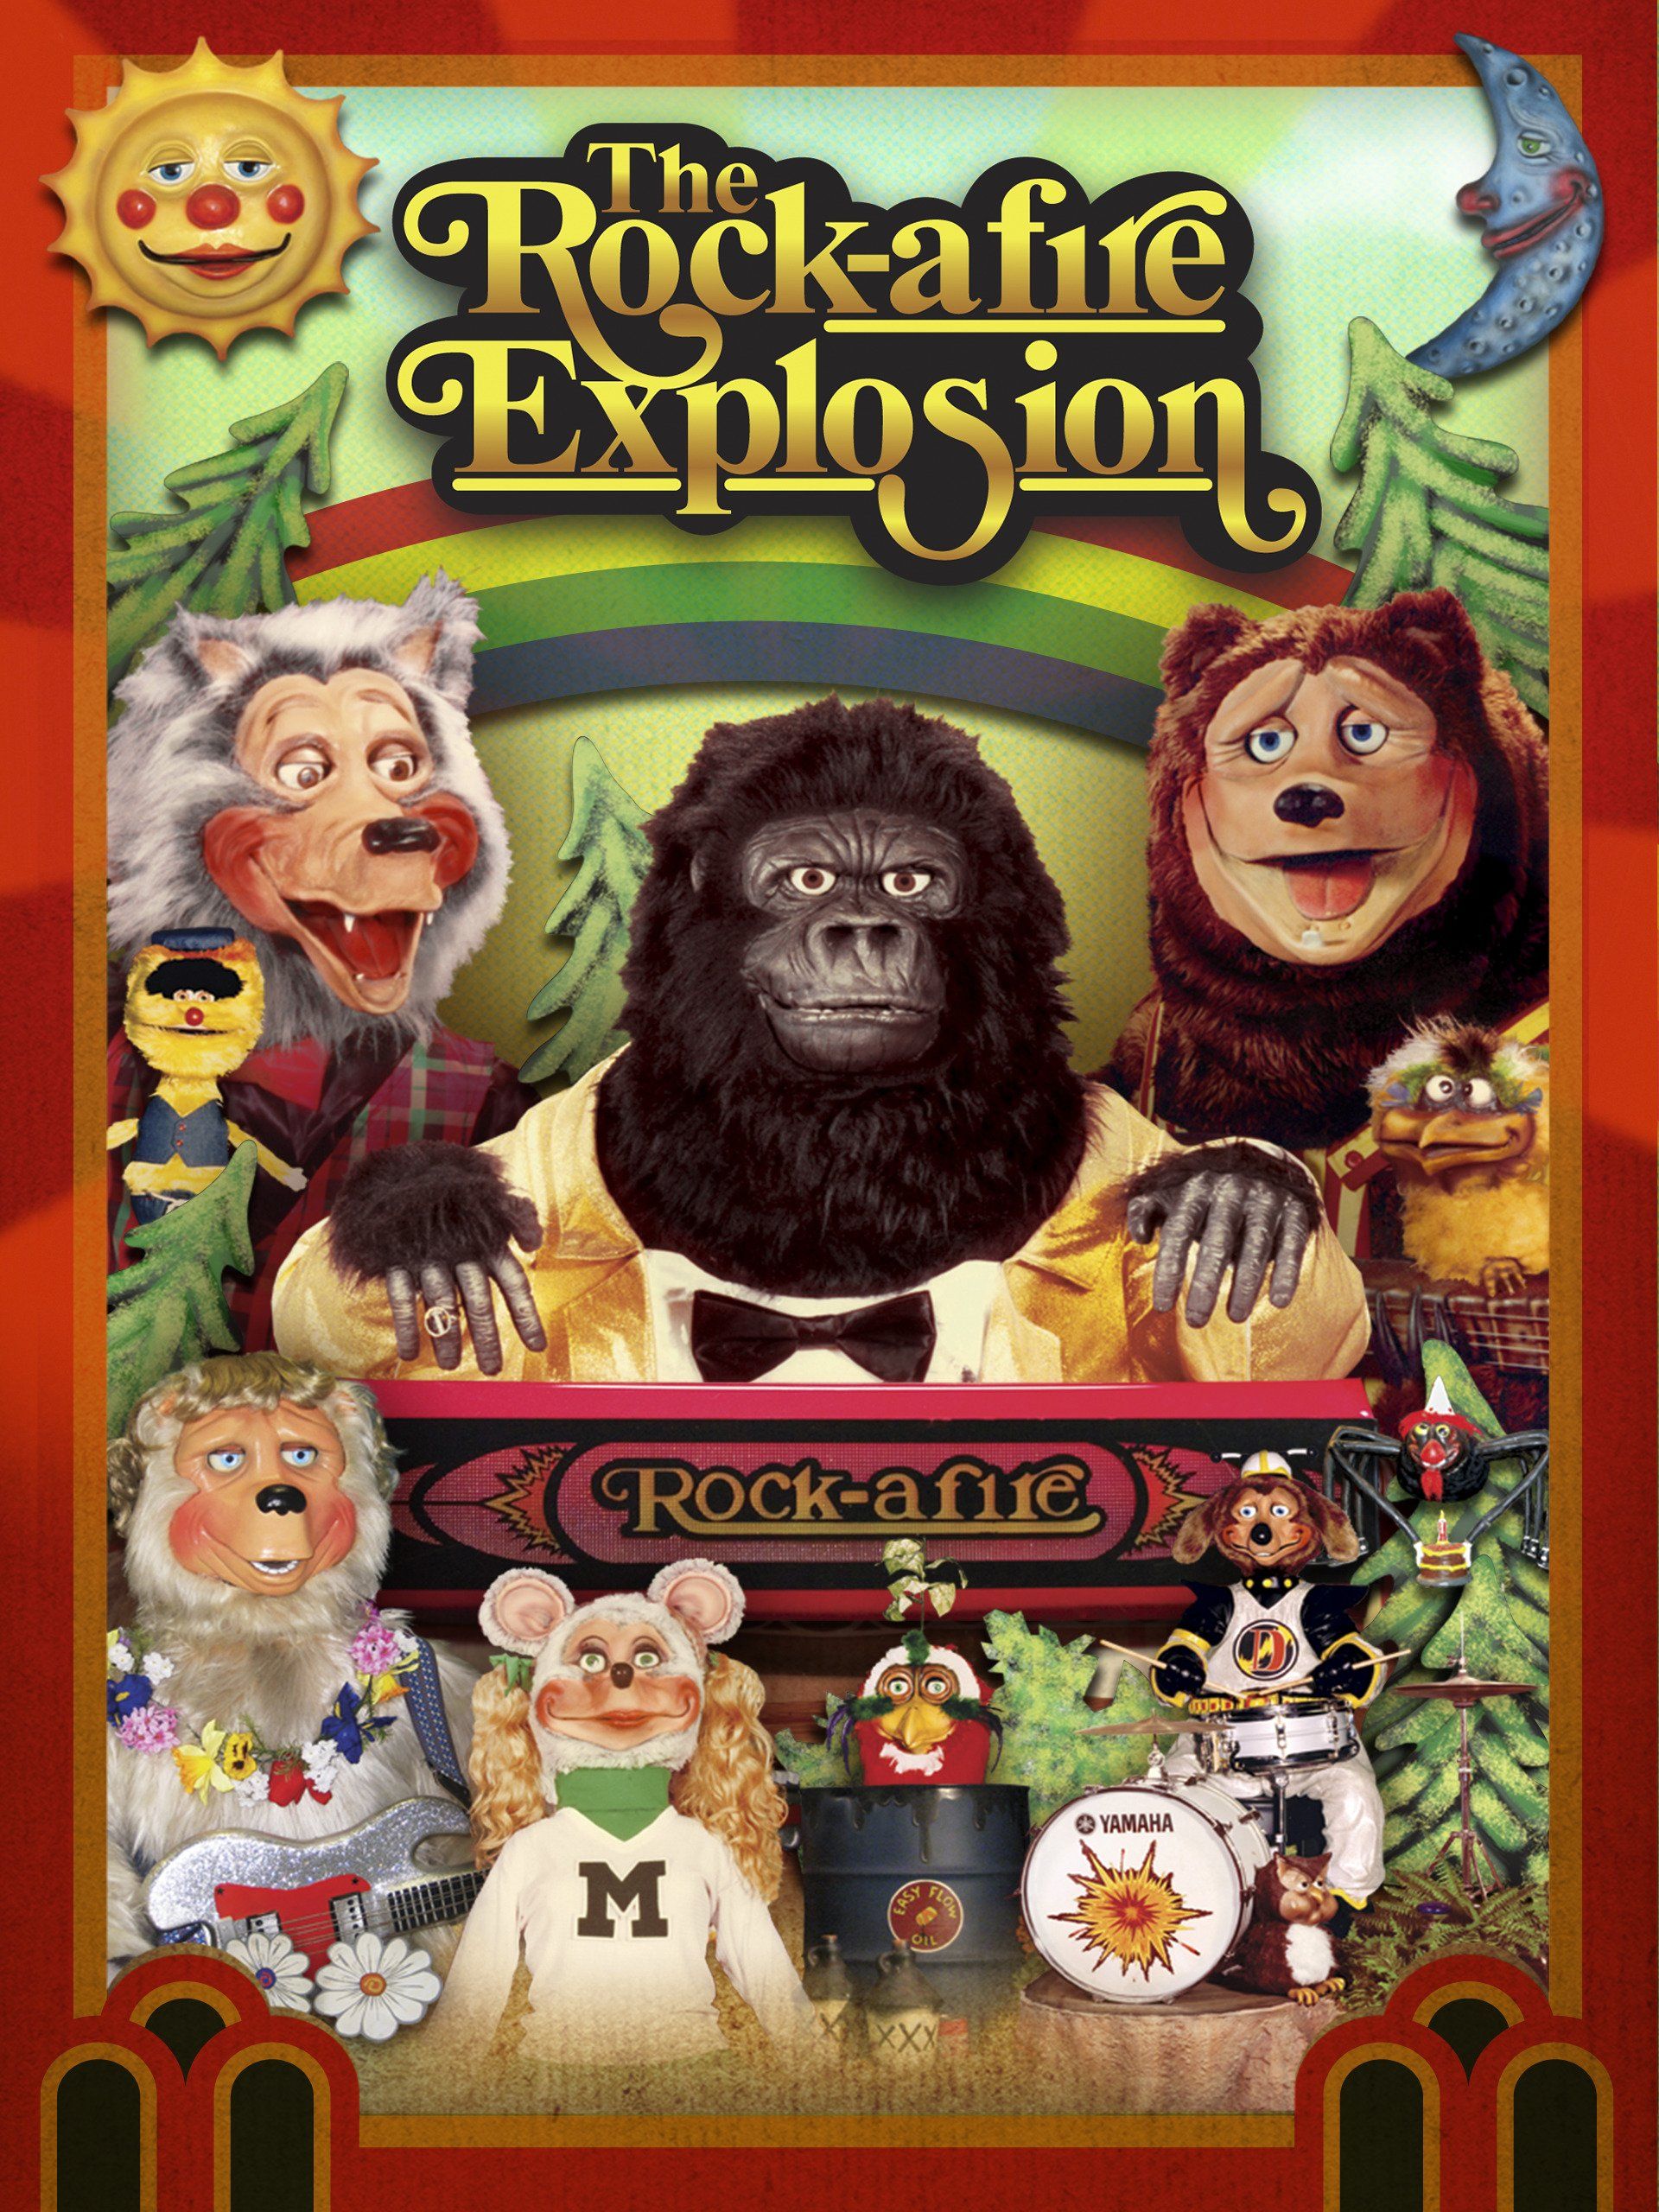 Watch The Rock Afire Explosion